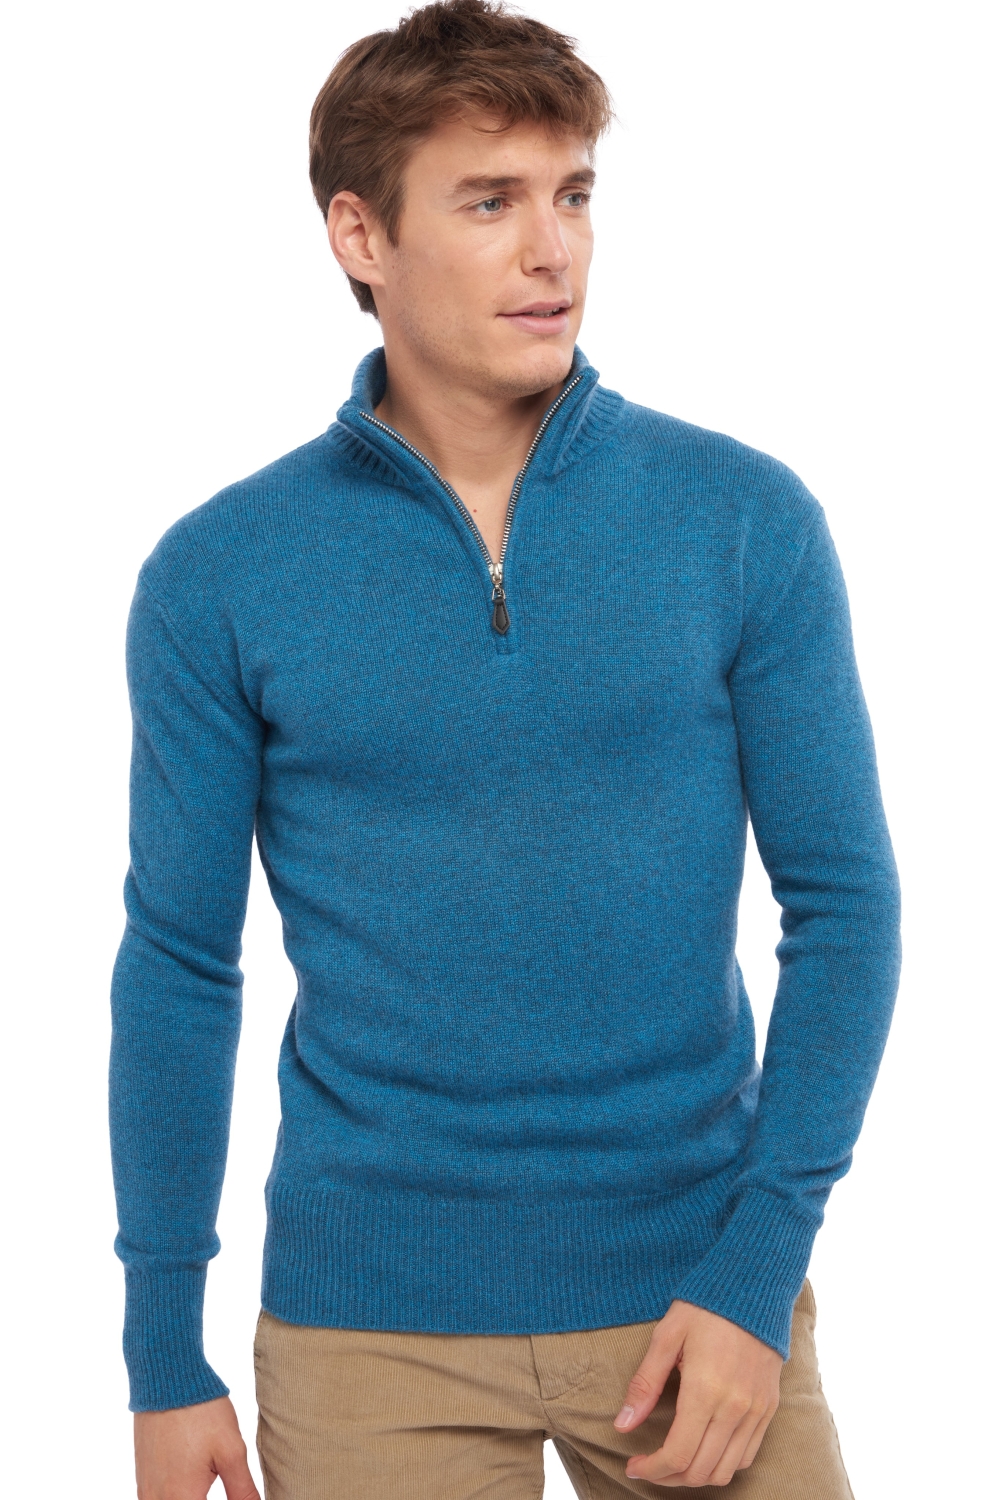 Cashmere men polo style sweaters donovan manor blue 4xl